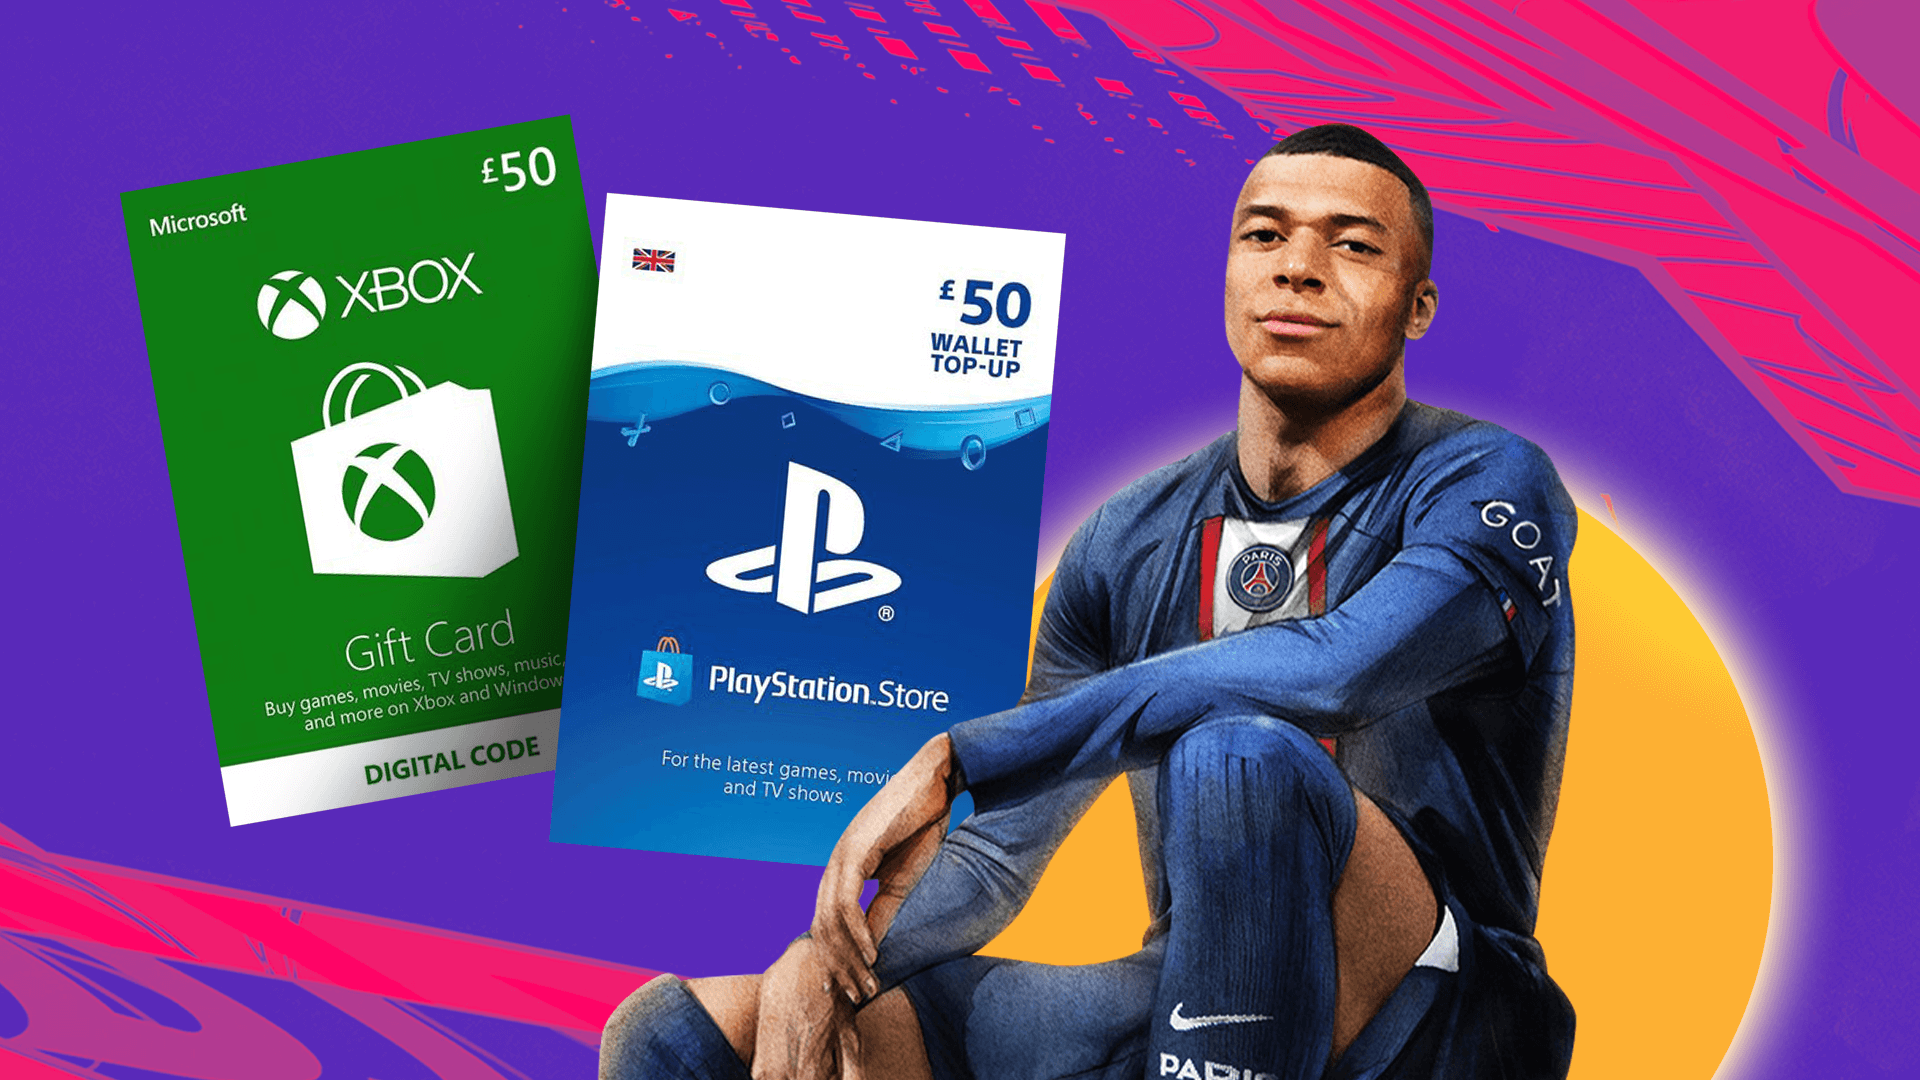 FIFA 23: HyperMotion2, pre-order bonuses, and how to buy the game